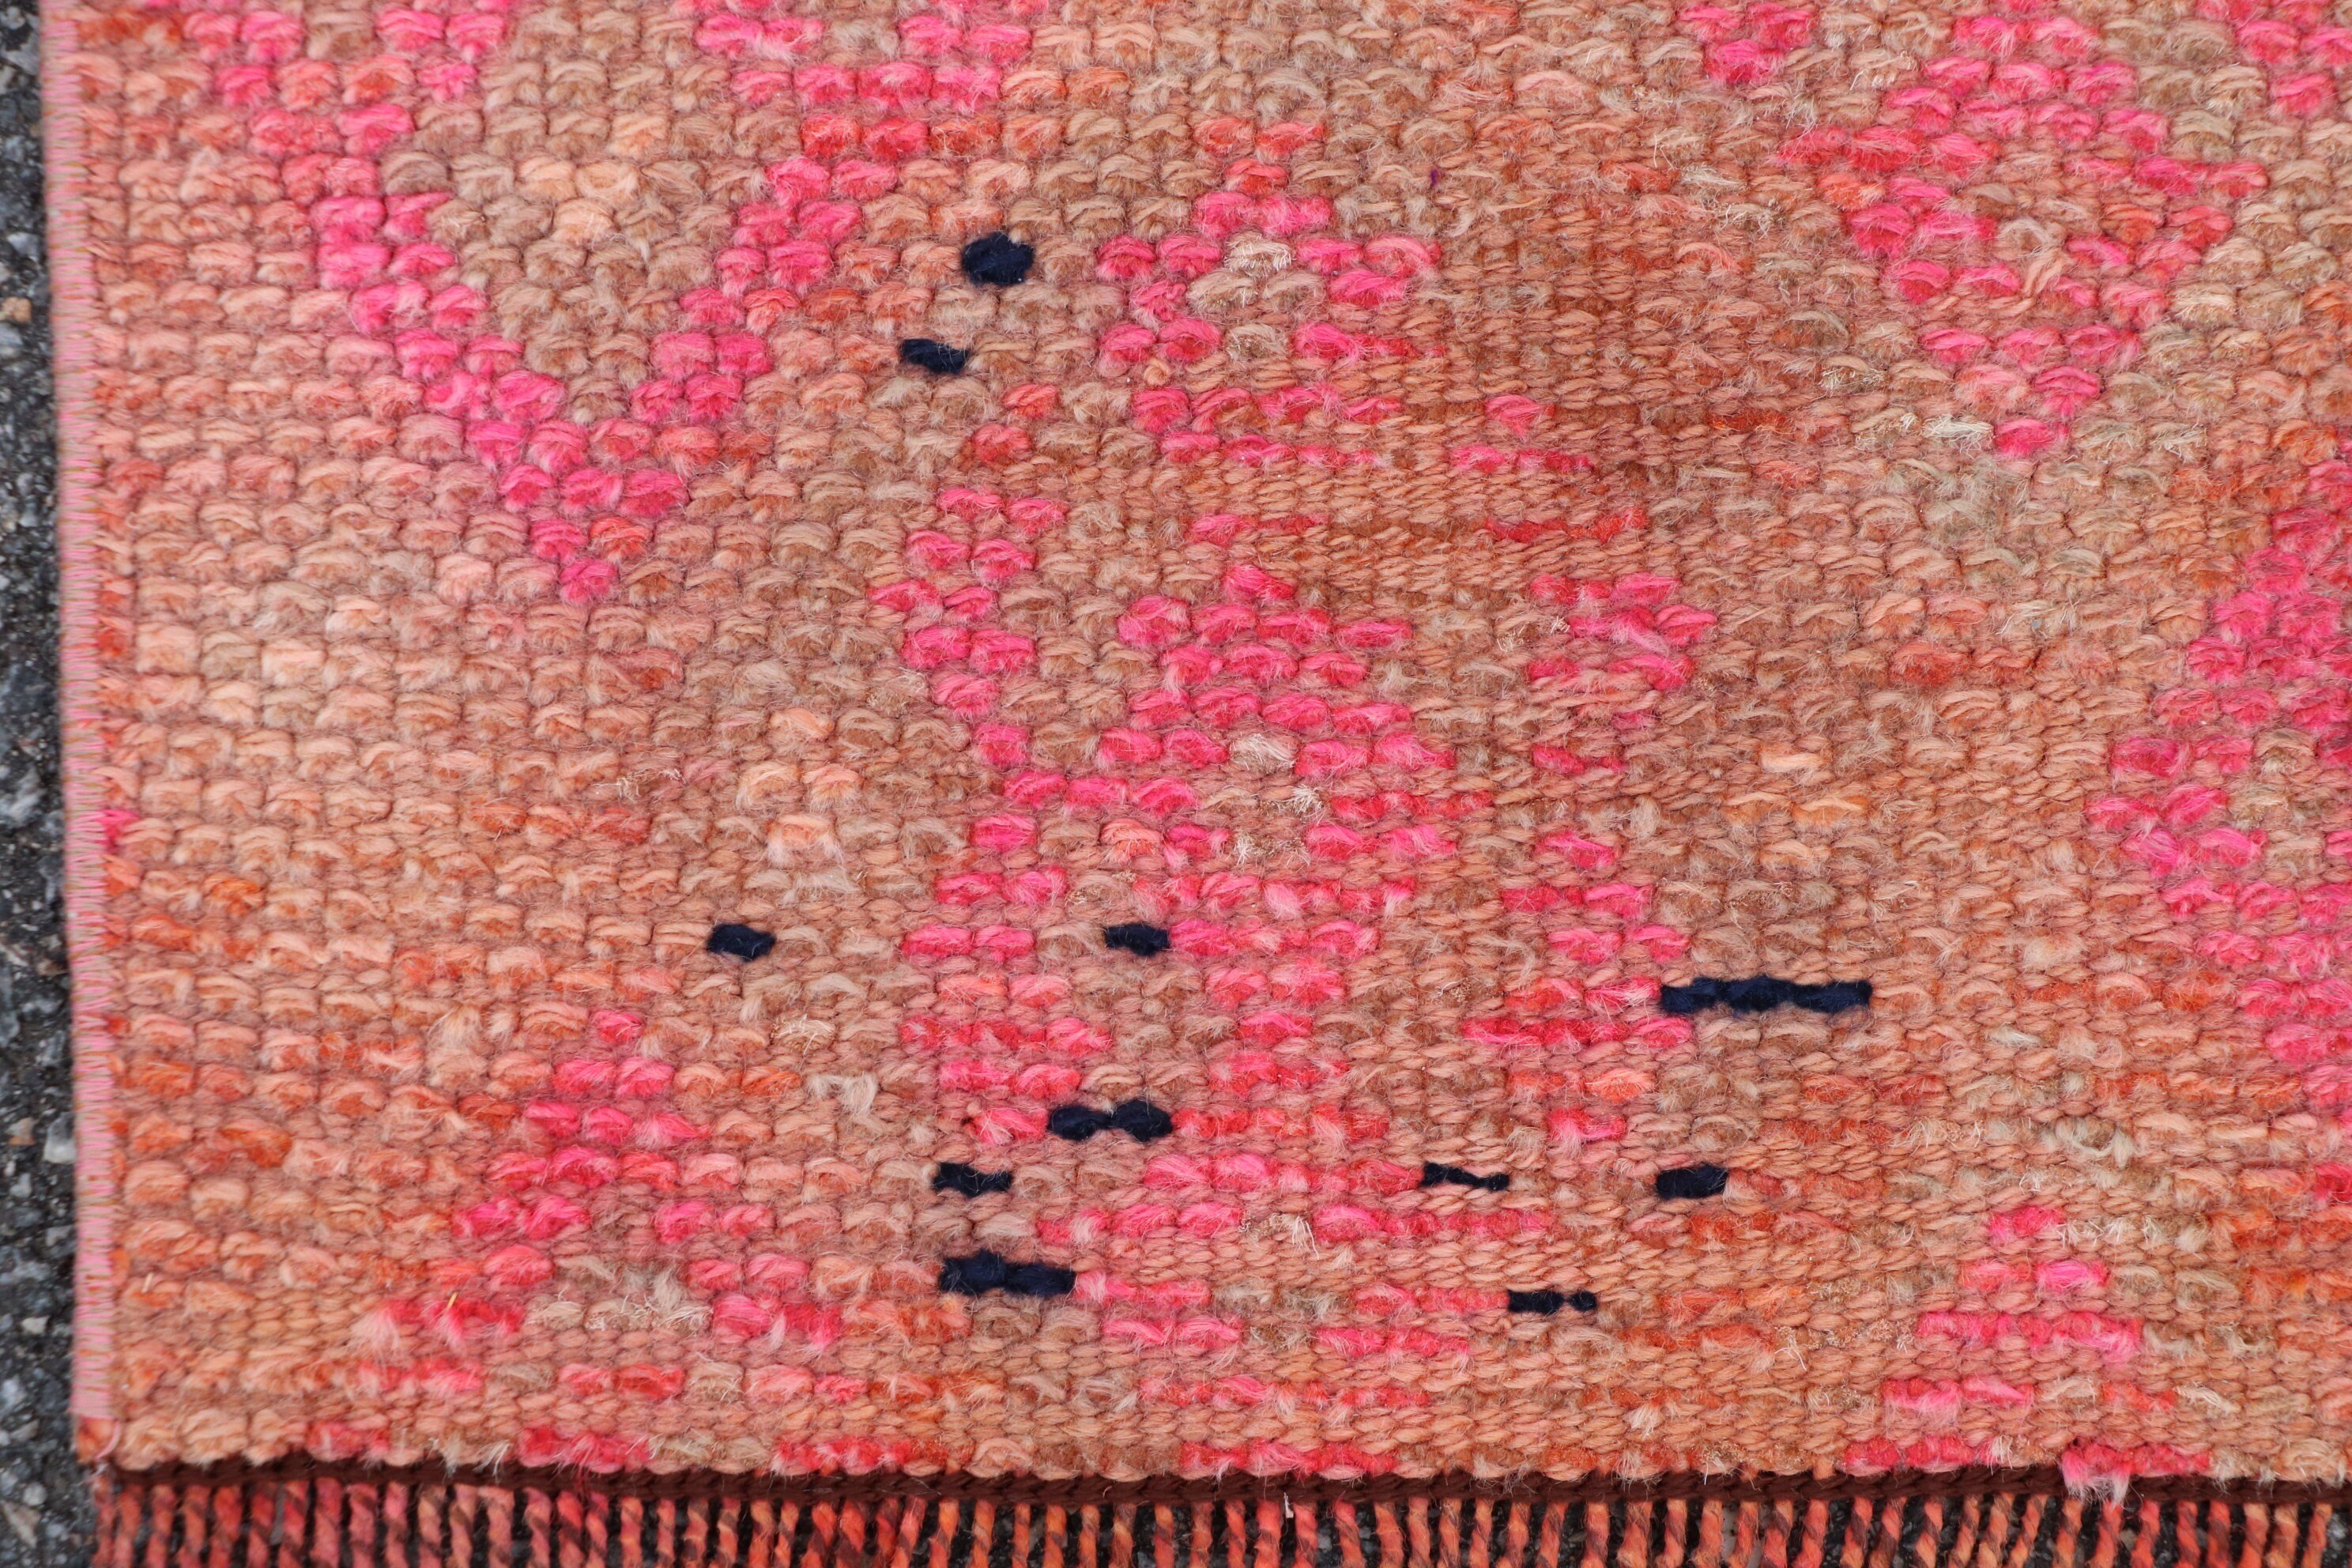 Pink Antique Rug, Vintage Rugs, Corridor Rug, 1.8x10.2 ft Runner Rugs, Rugs for Kitchen, Stair Rugs, Turkish Rug, Cool Rug, Home Decor Rug